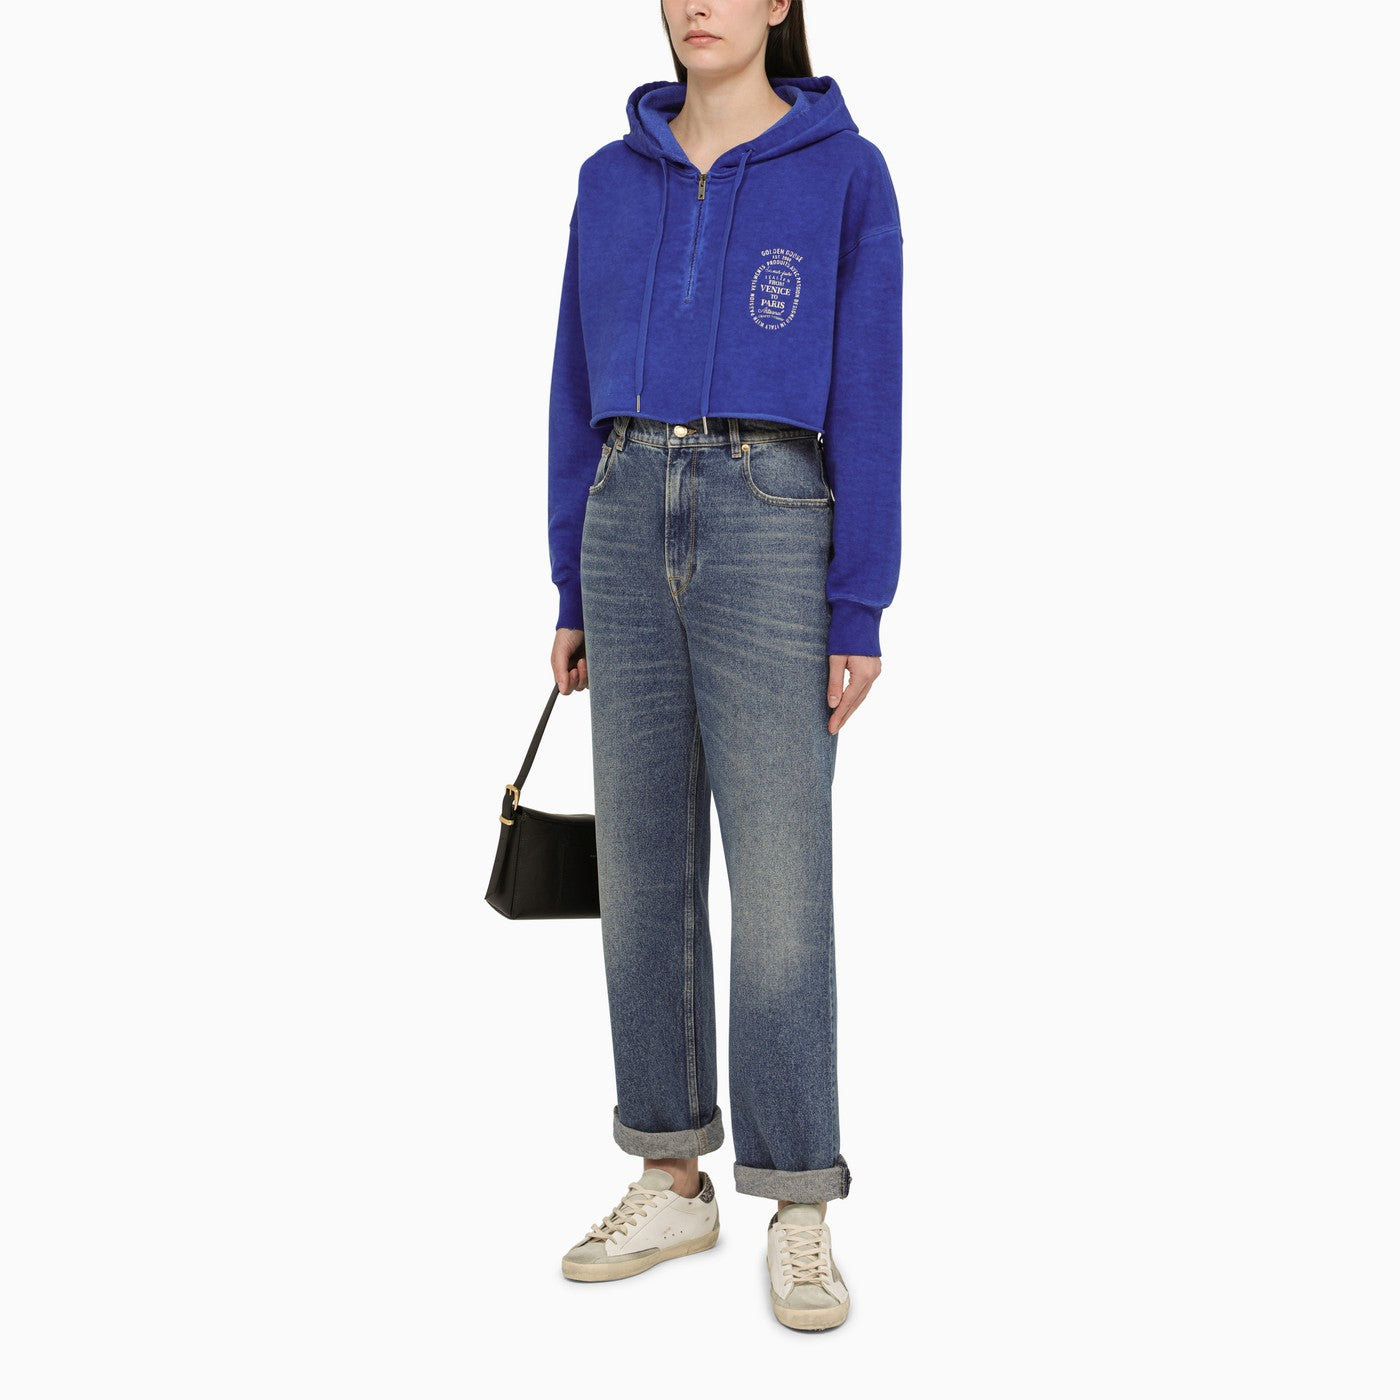 Golden Goose Navy Blue Cropped Hoodie